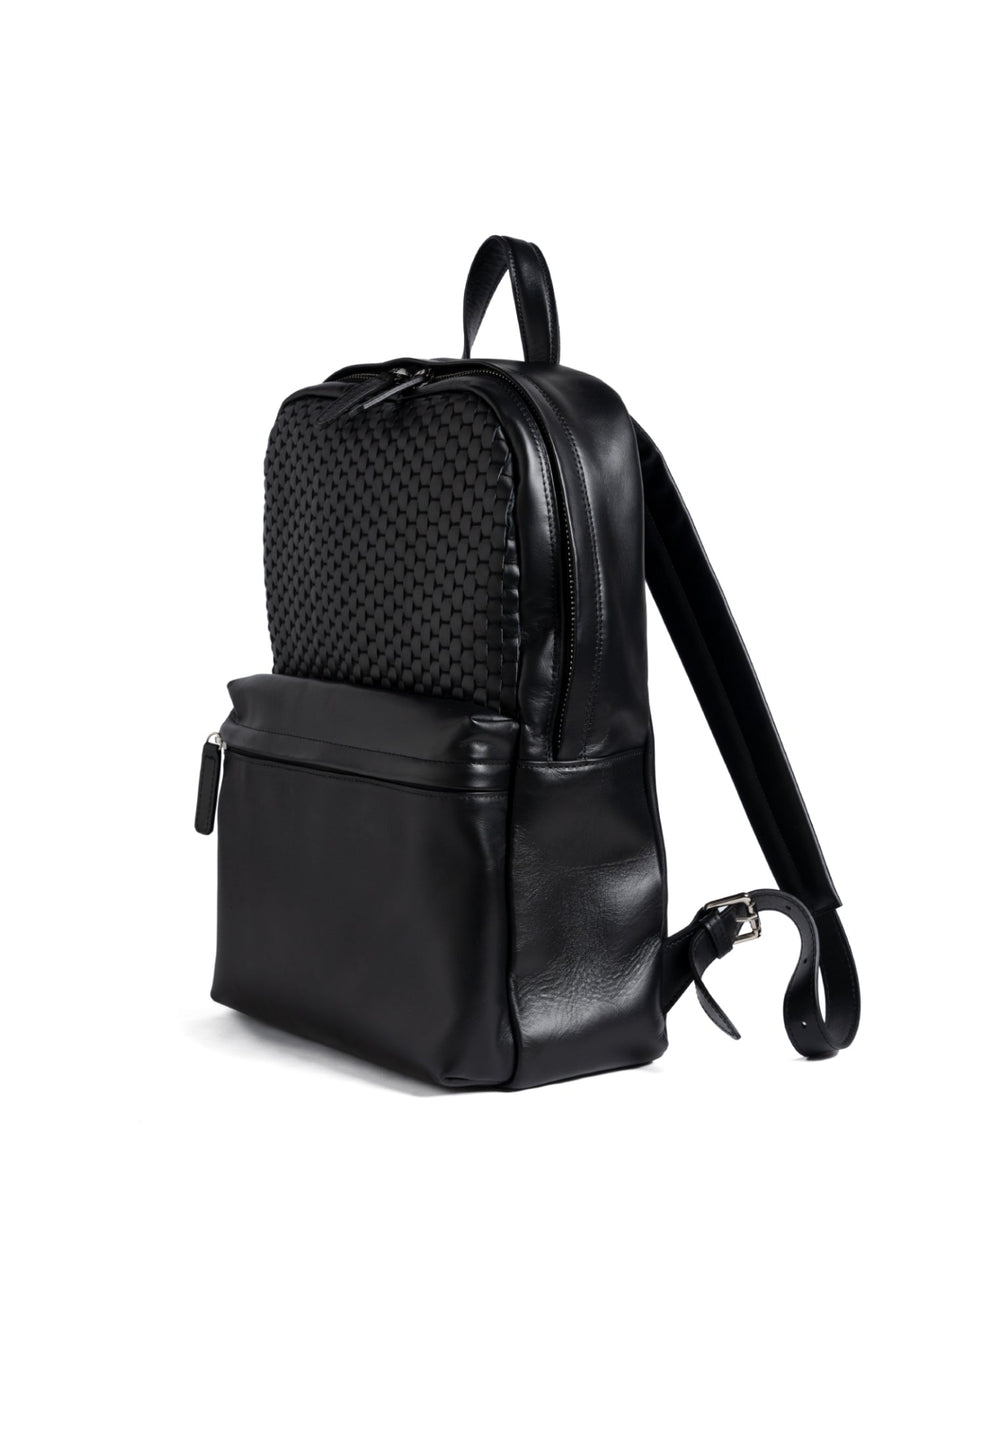 Black leather backpack with woven front pocket and zipper closures